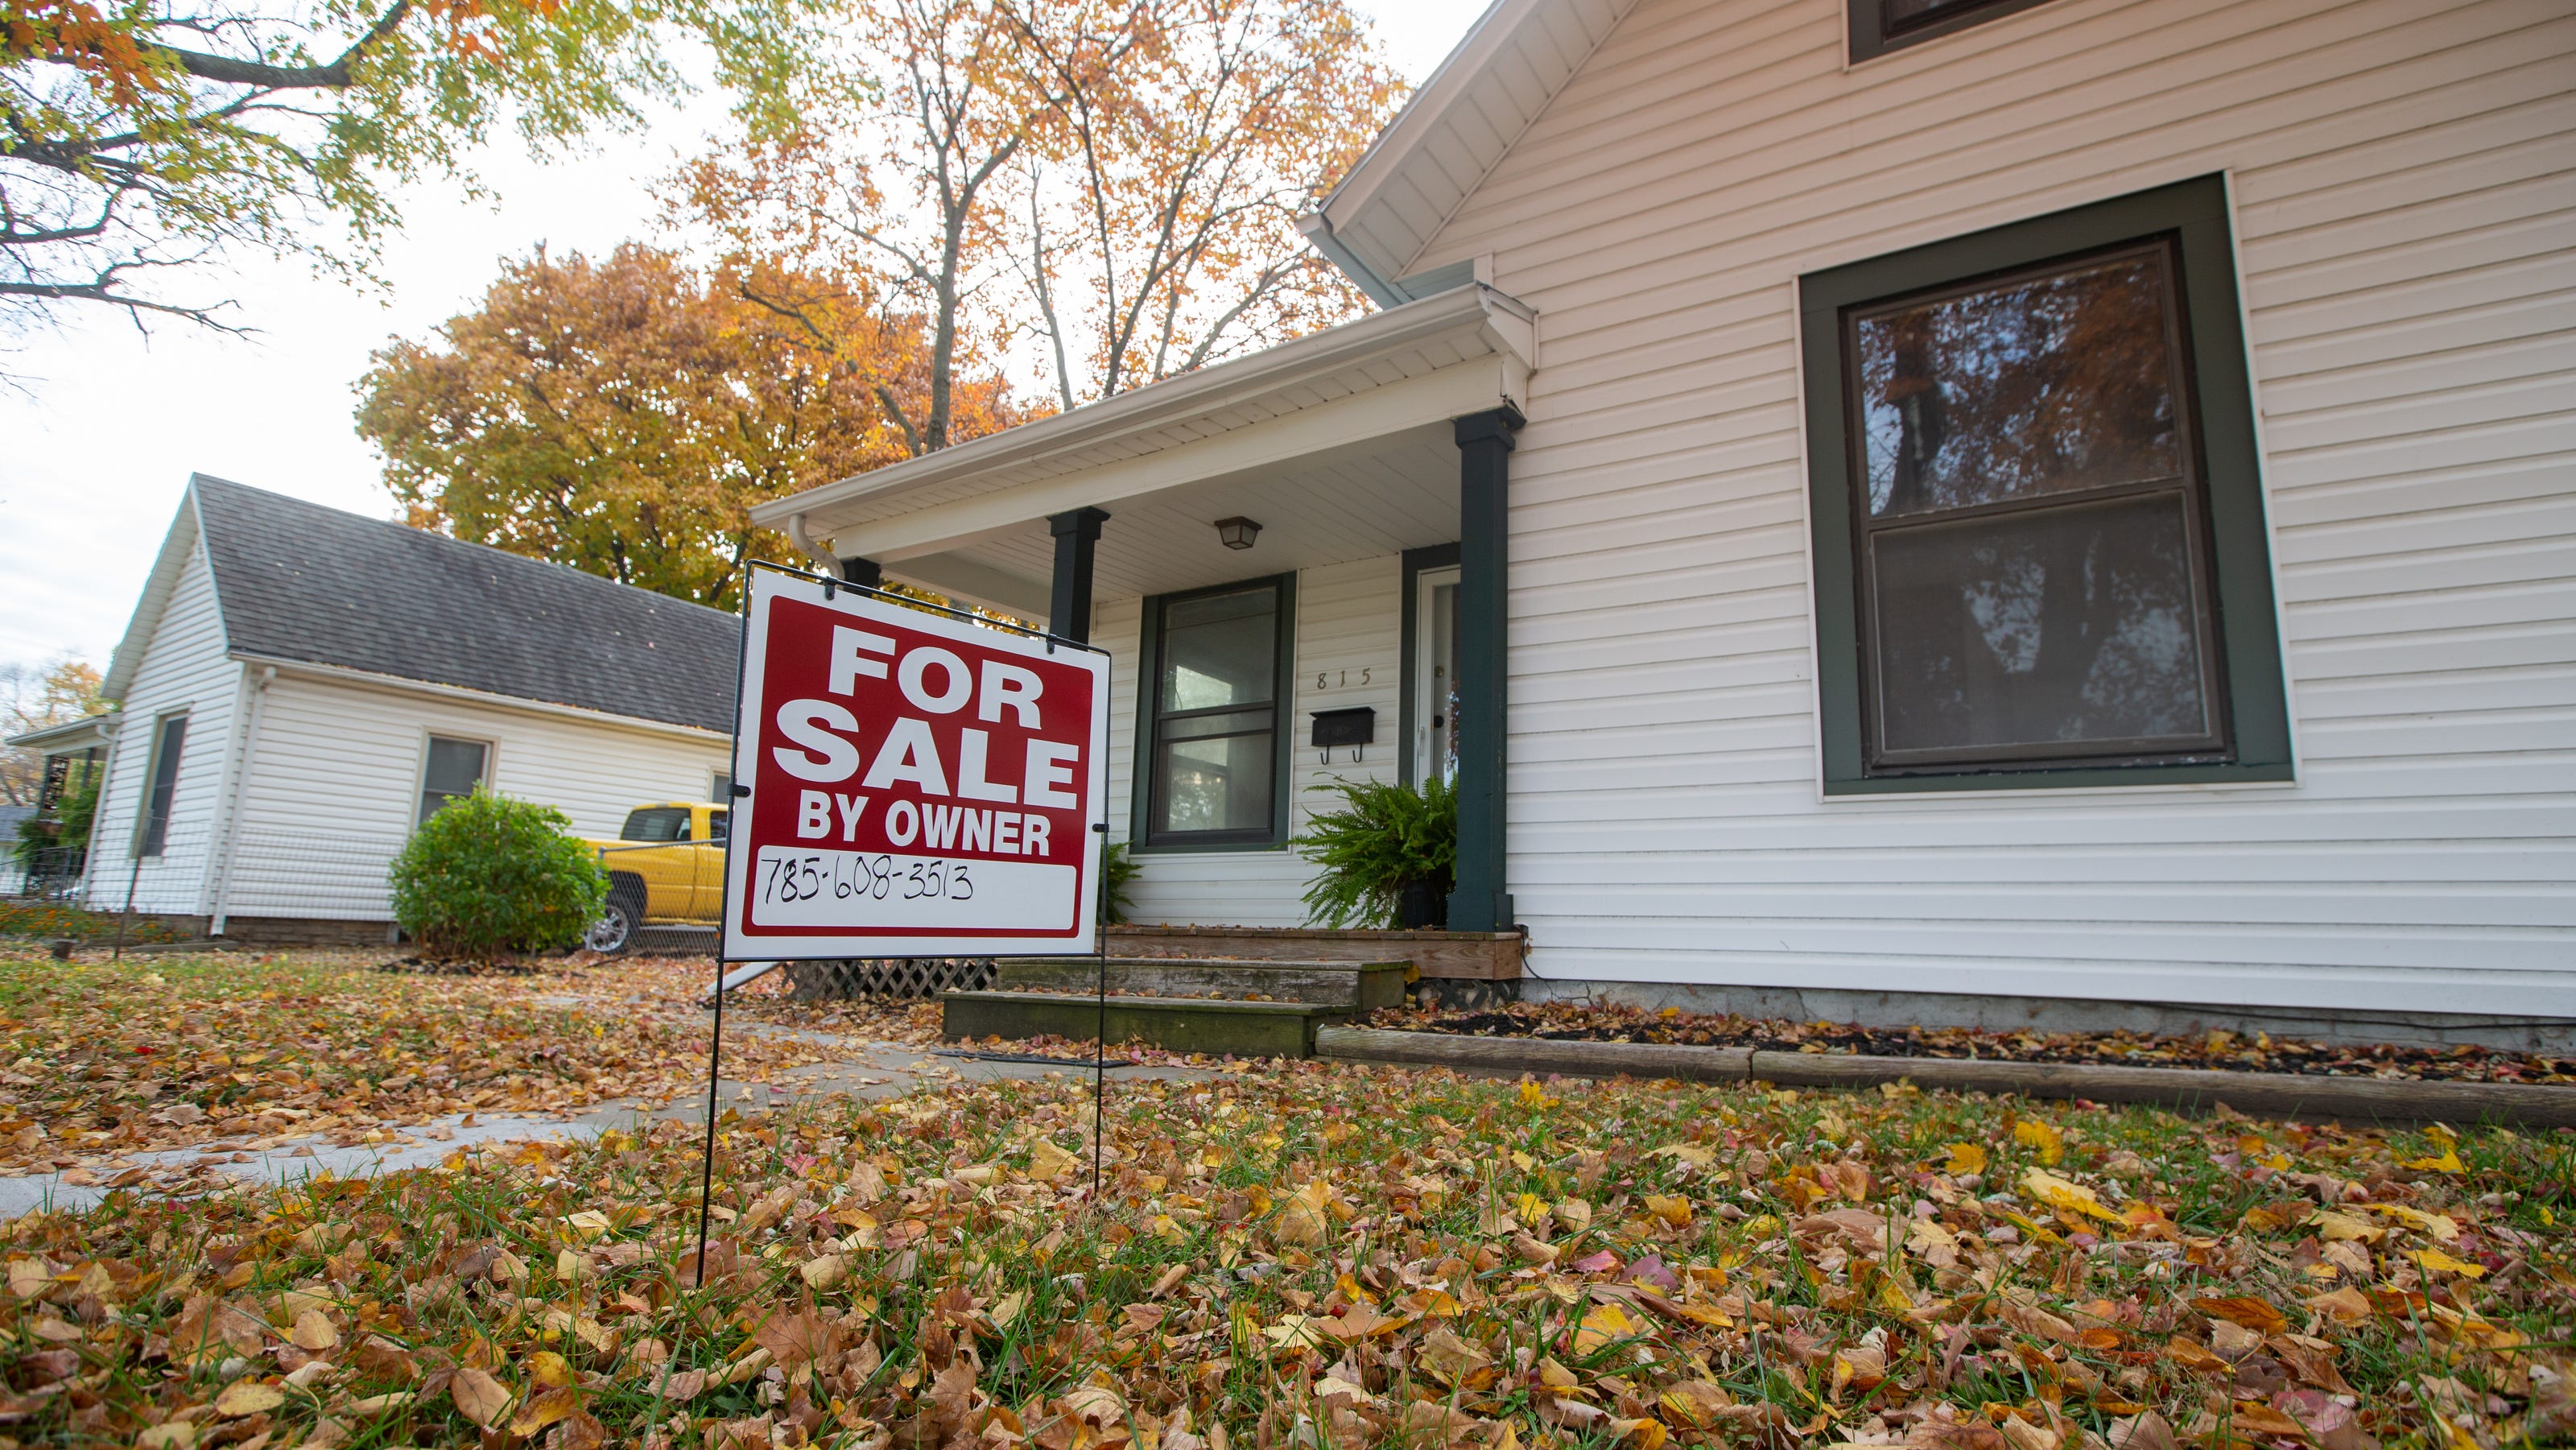 Property transfers for Lincoln & Minnehaha County Oct. 48